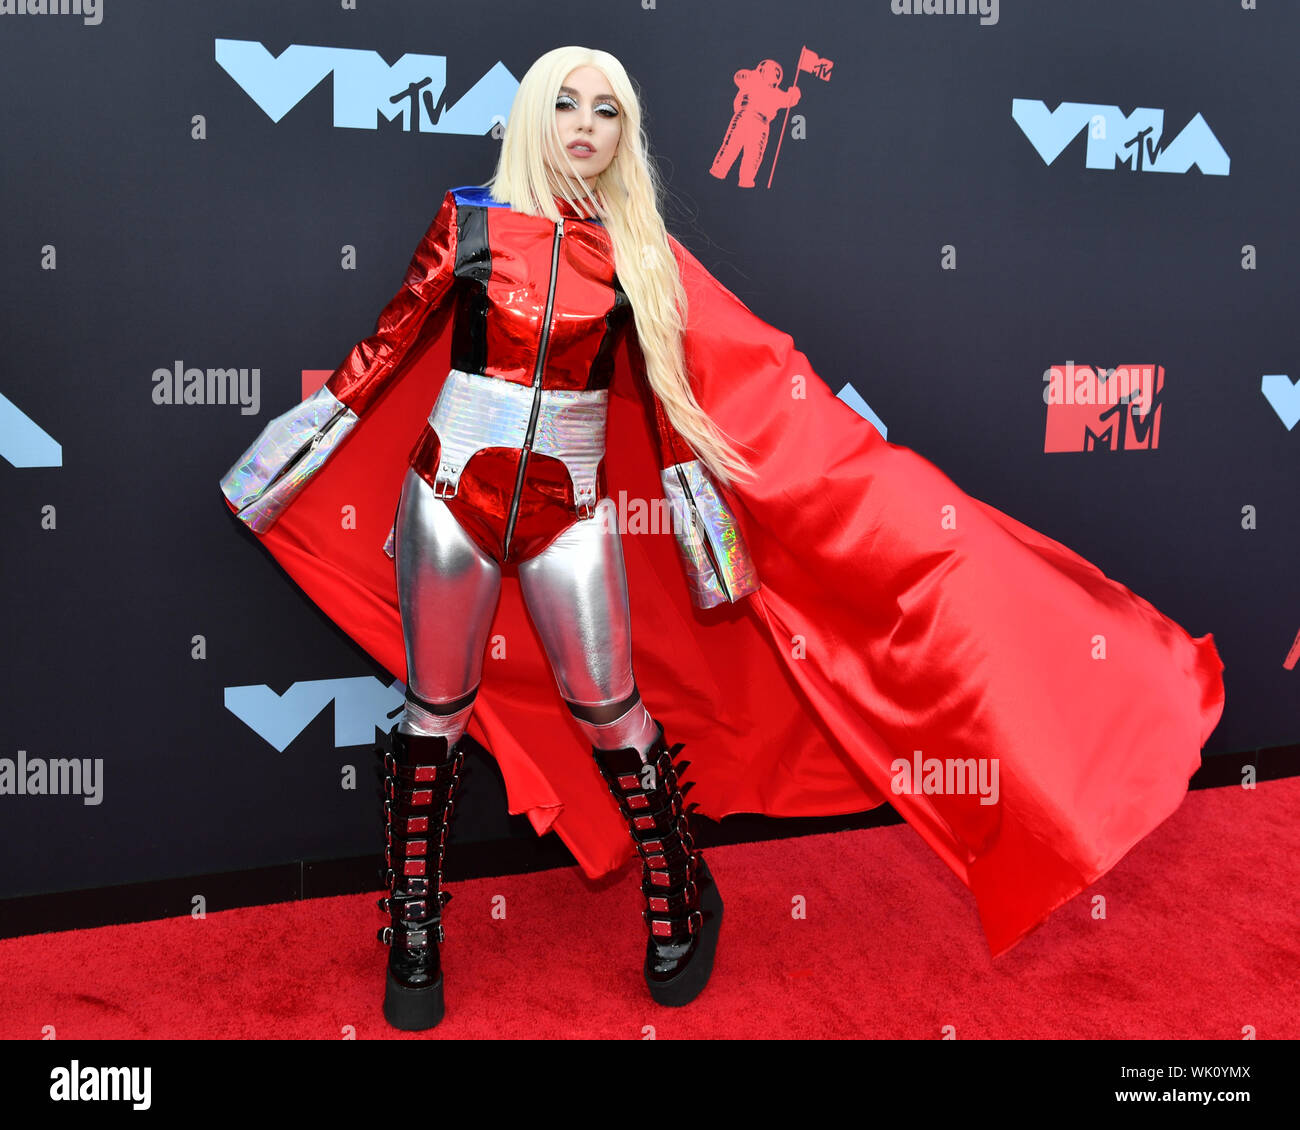 Ava Max attends the 2019 MTV Video Music Awards at Prudential Center on August 26, 2019 in Newark, New Jersey. Stock Photo